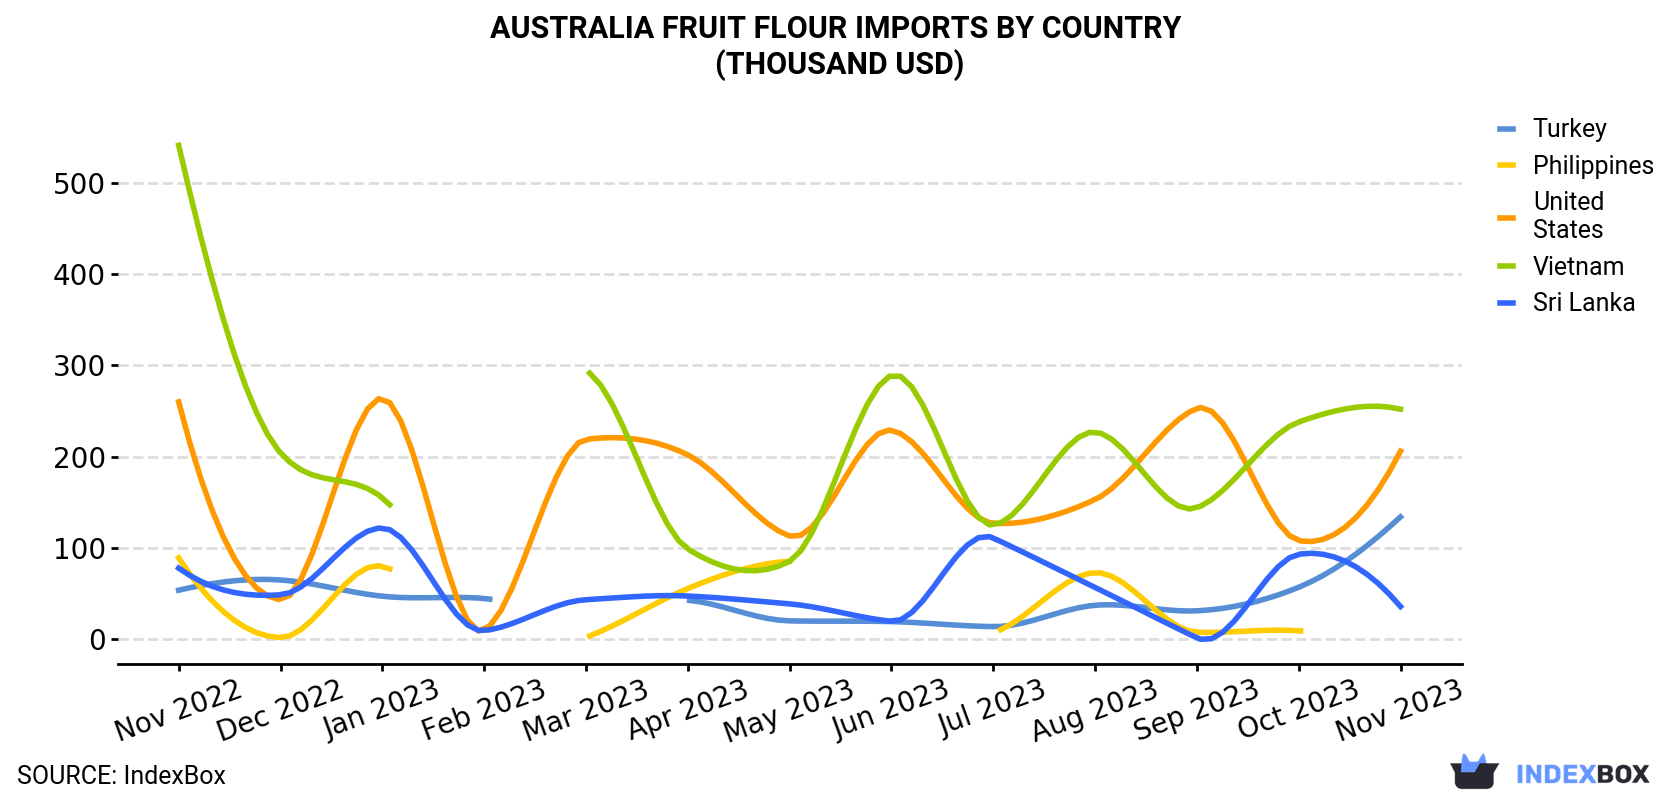 Australia Fruit Flour Imports By Country (Thousand USD)